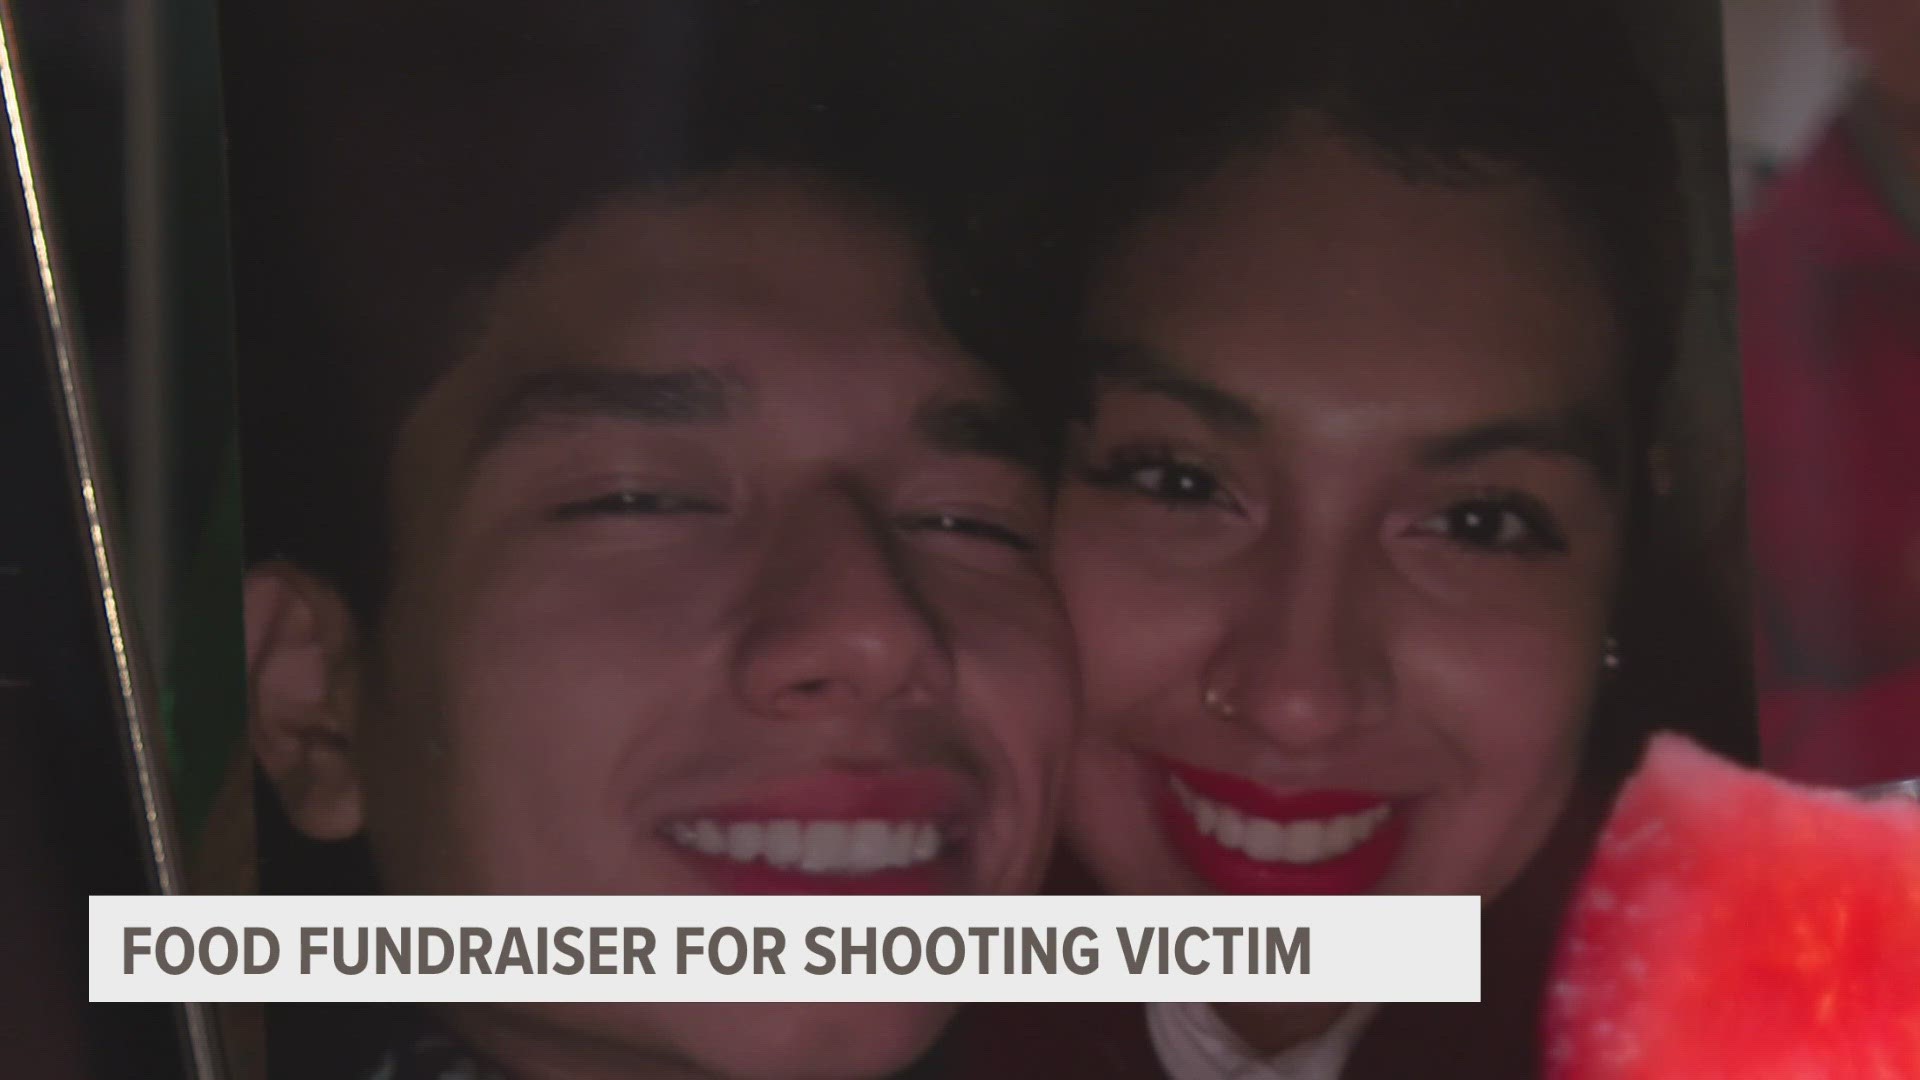 The food fundraiser will be held on Sunday, Feb. 4 at Maggie's Kitchen in Grand Rapids. Funds will be used to bury 20-year-old Martín Eduardo Martinez-Ramirez.